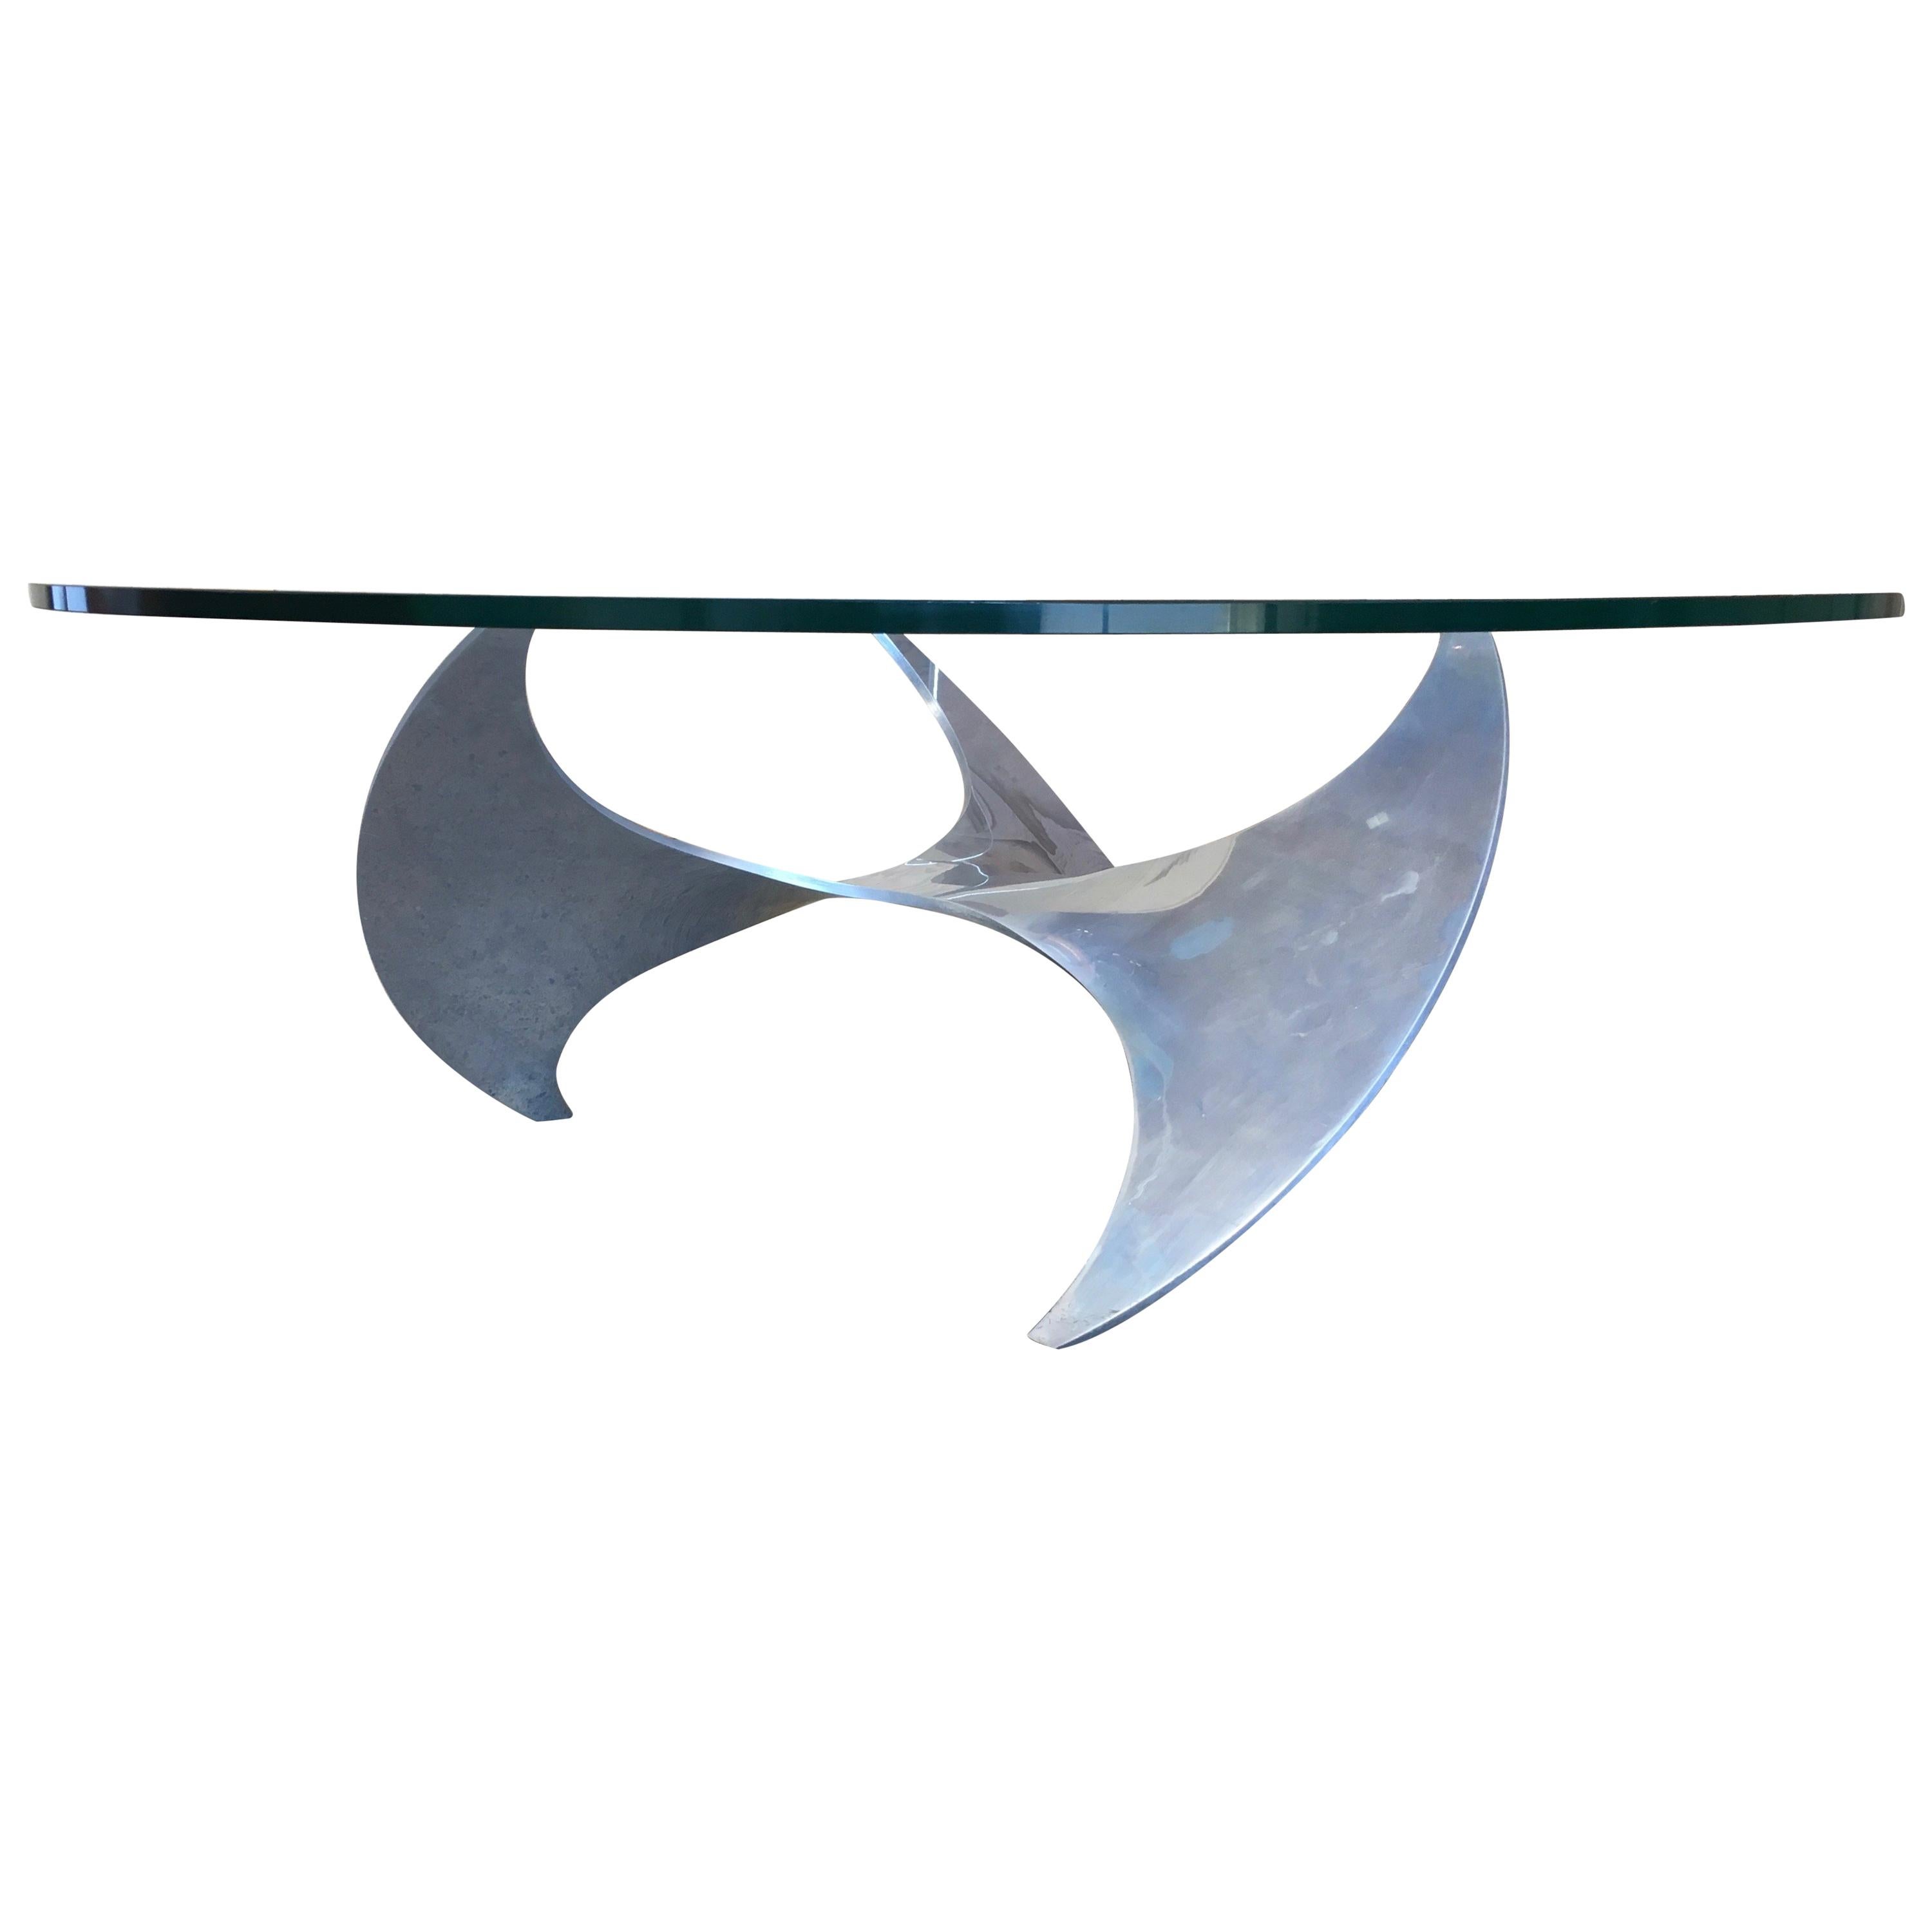 Aluminium and Glass Propeller Table by Knut Hesterberg